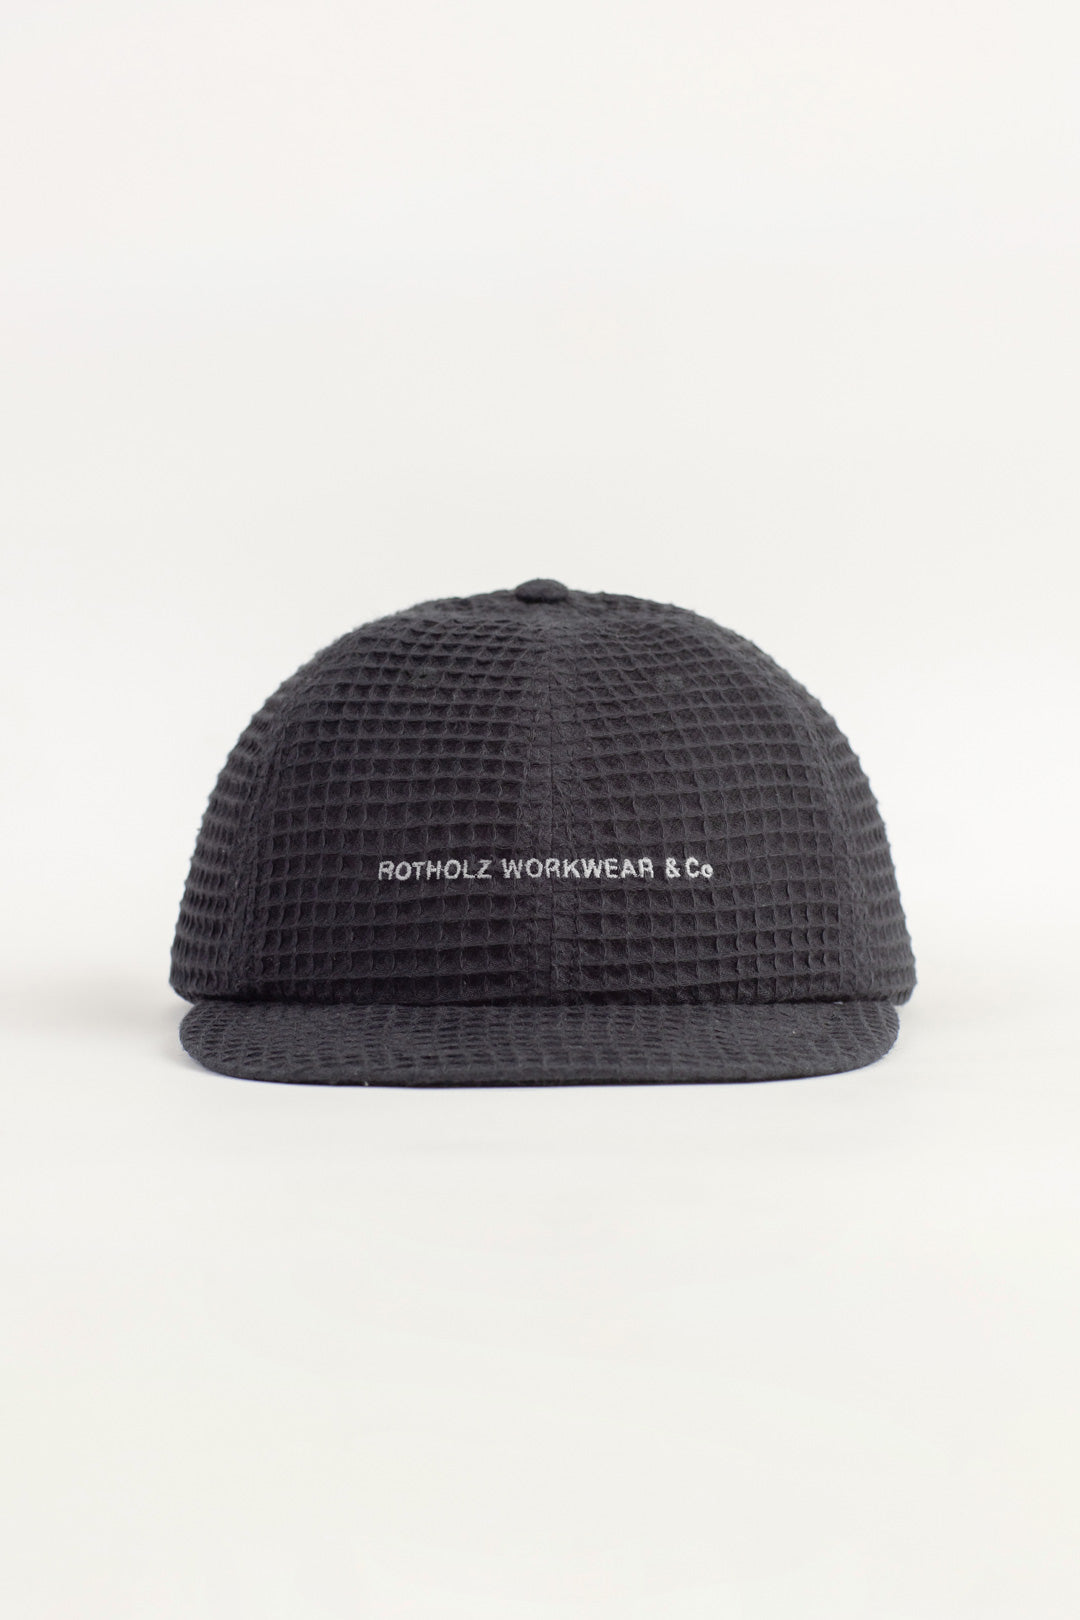 Black waffle cap made from 100% organic cotton by Rotholz